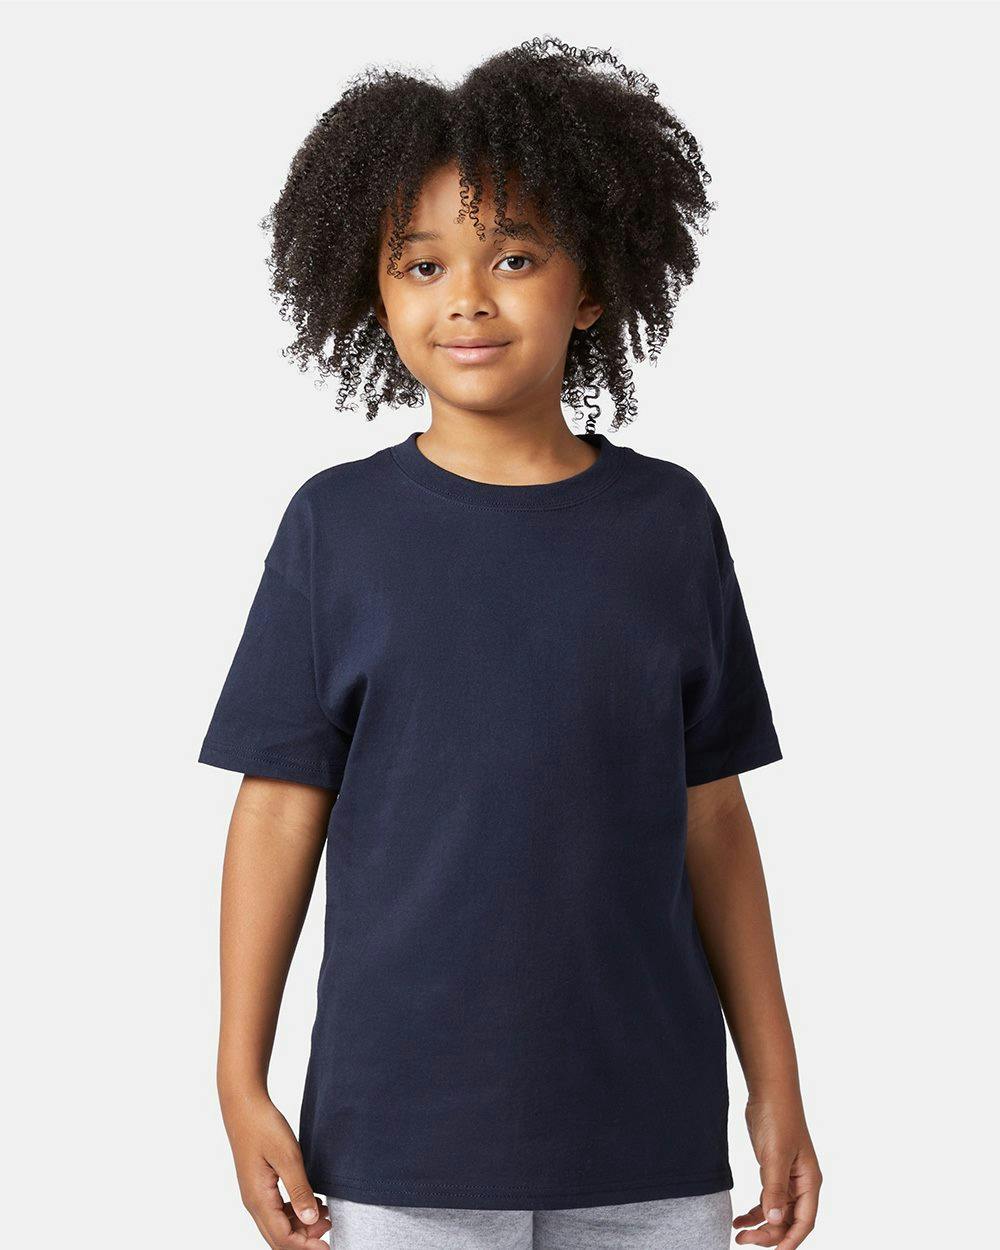 Image for Youth Tagless T-Shirt - T435